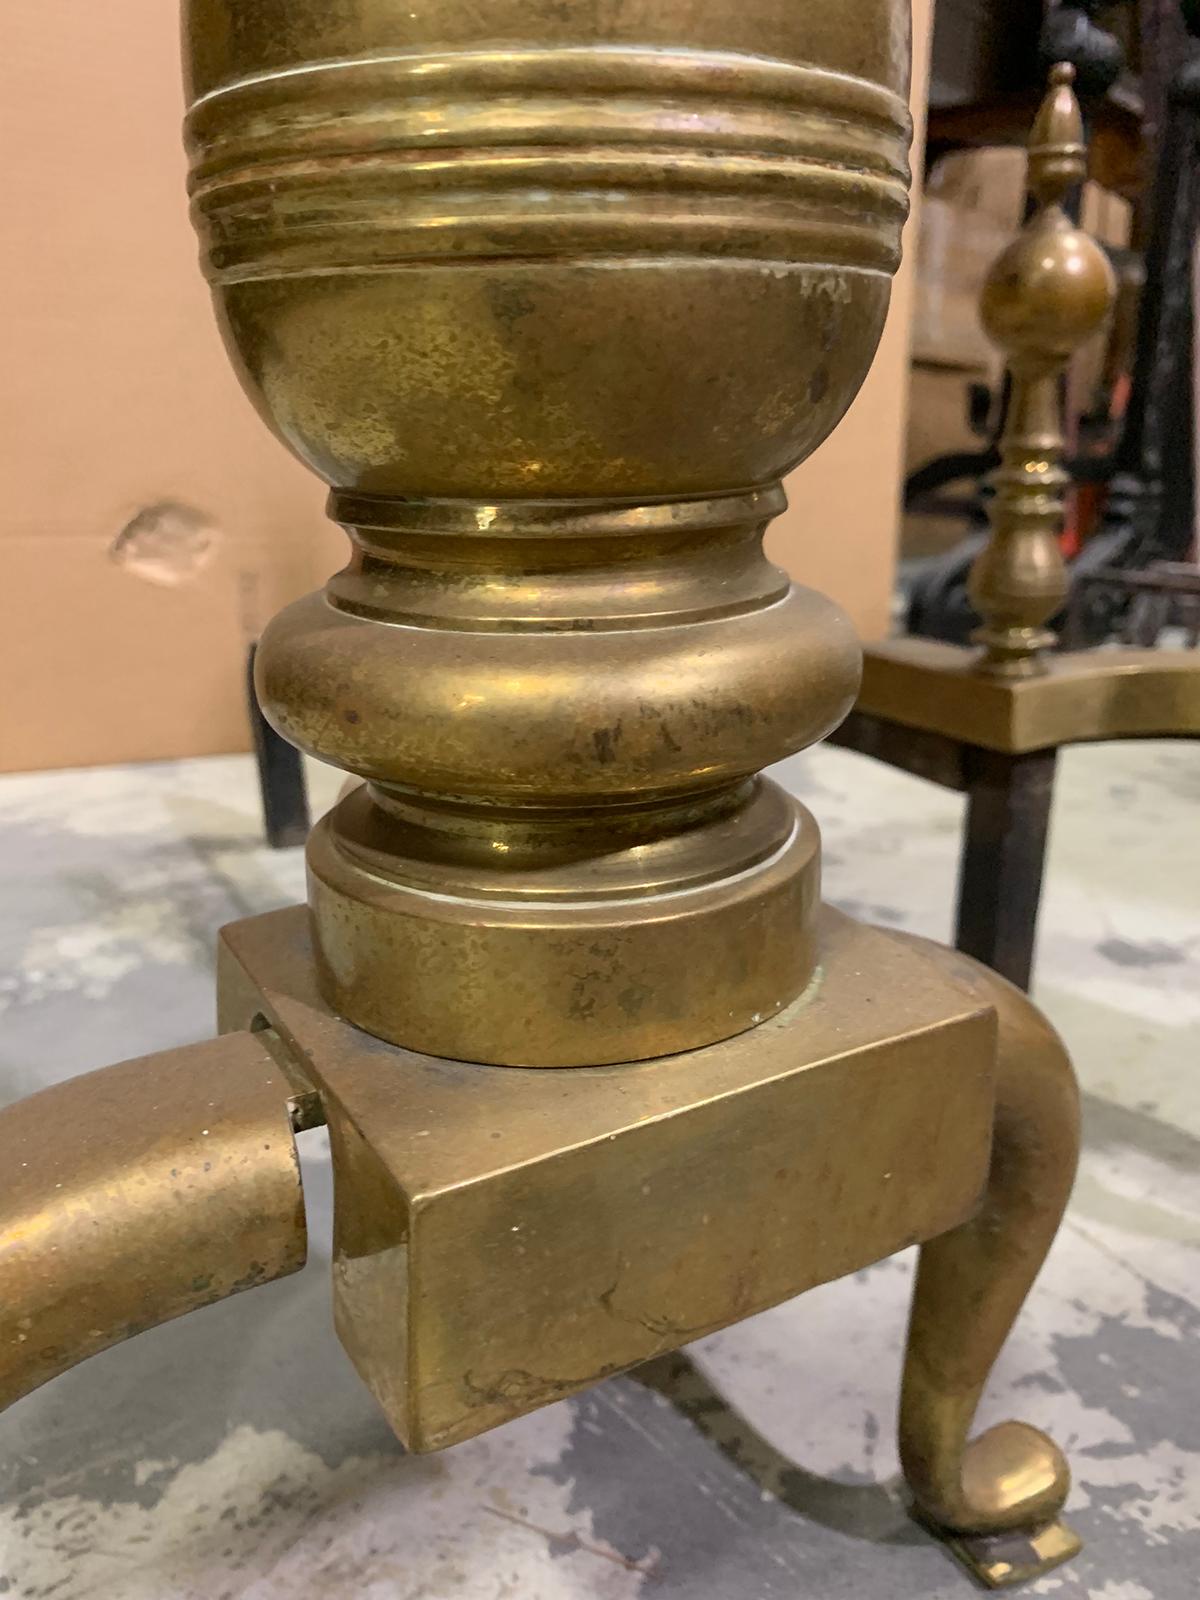 Pair of 19th-20th century large scale American brass andirons with ball finials.